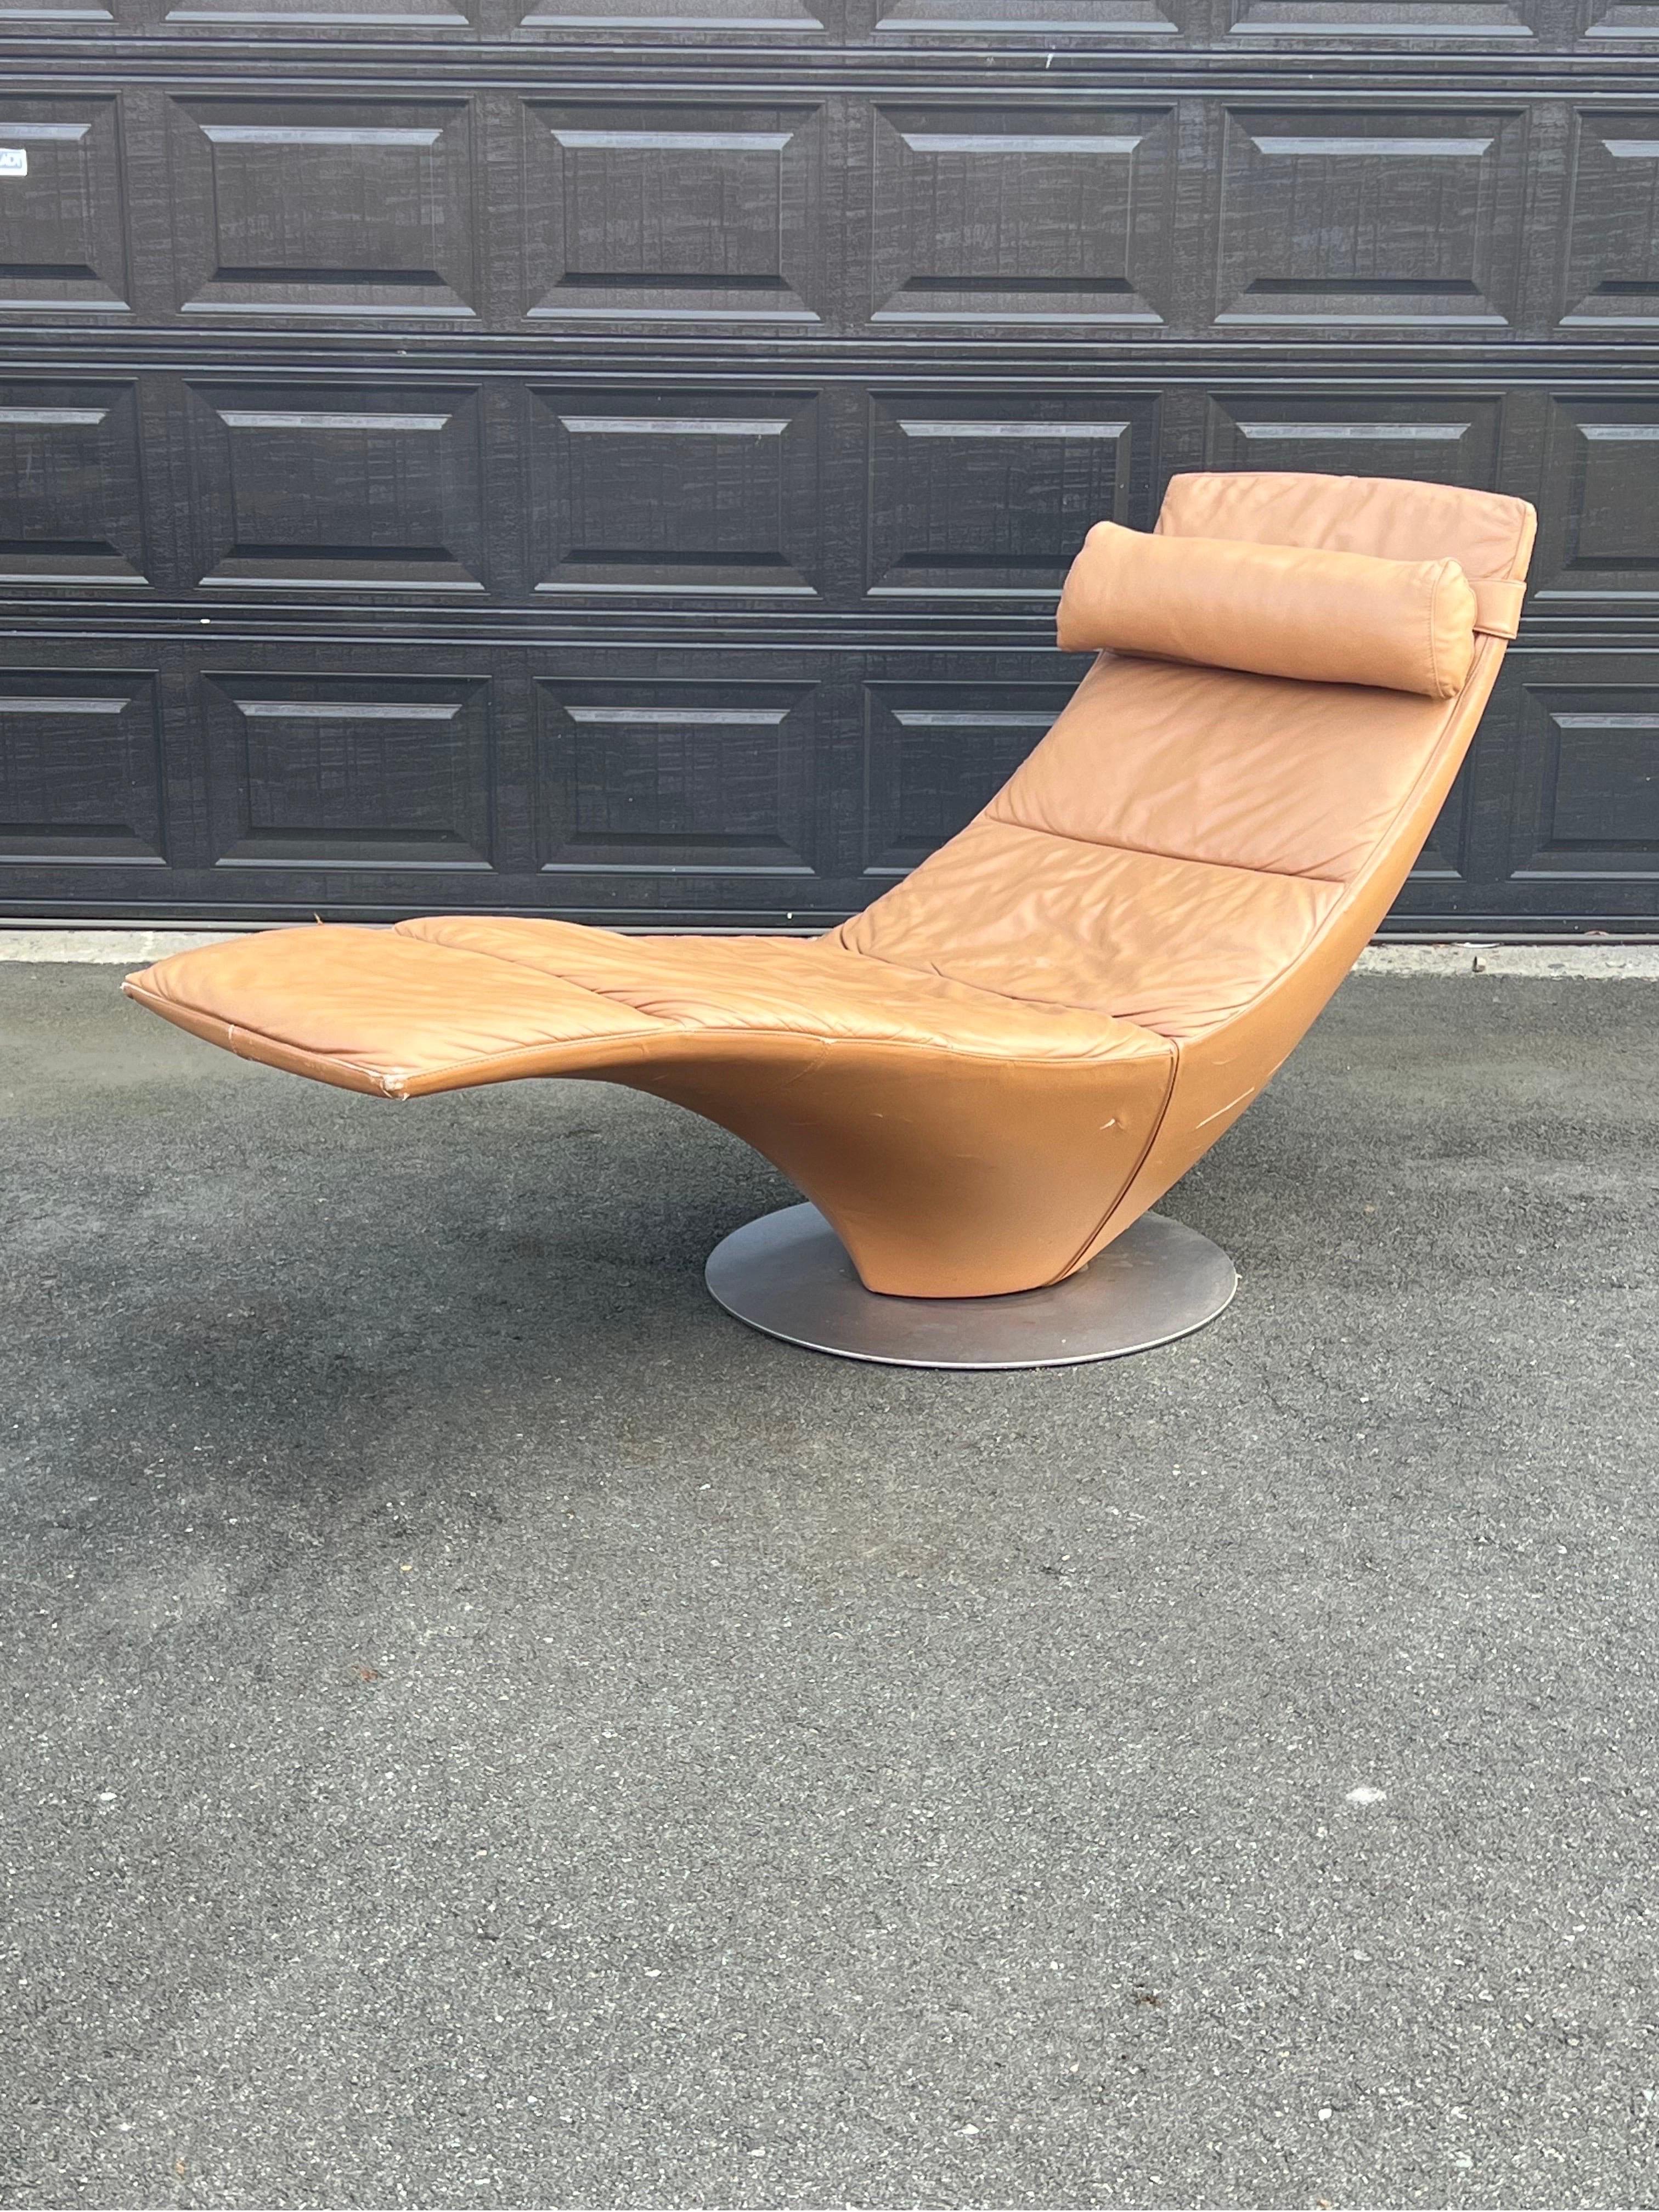 Modern chaise lounge designed by Natuzzi, Italy circa 1990s. This sculptural style chaise rests on a round metal base and swivels with ease. Extremely comfortable seating with original tan leather. Chaise is equipped with detachable head pillow with